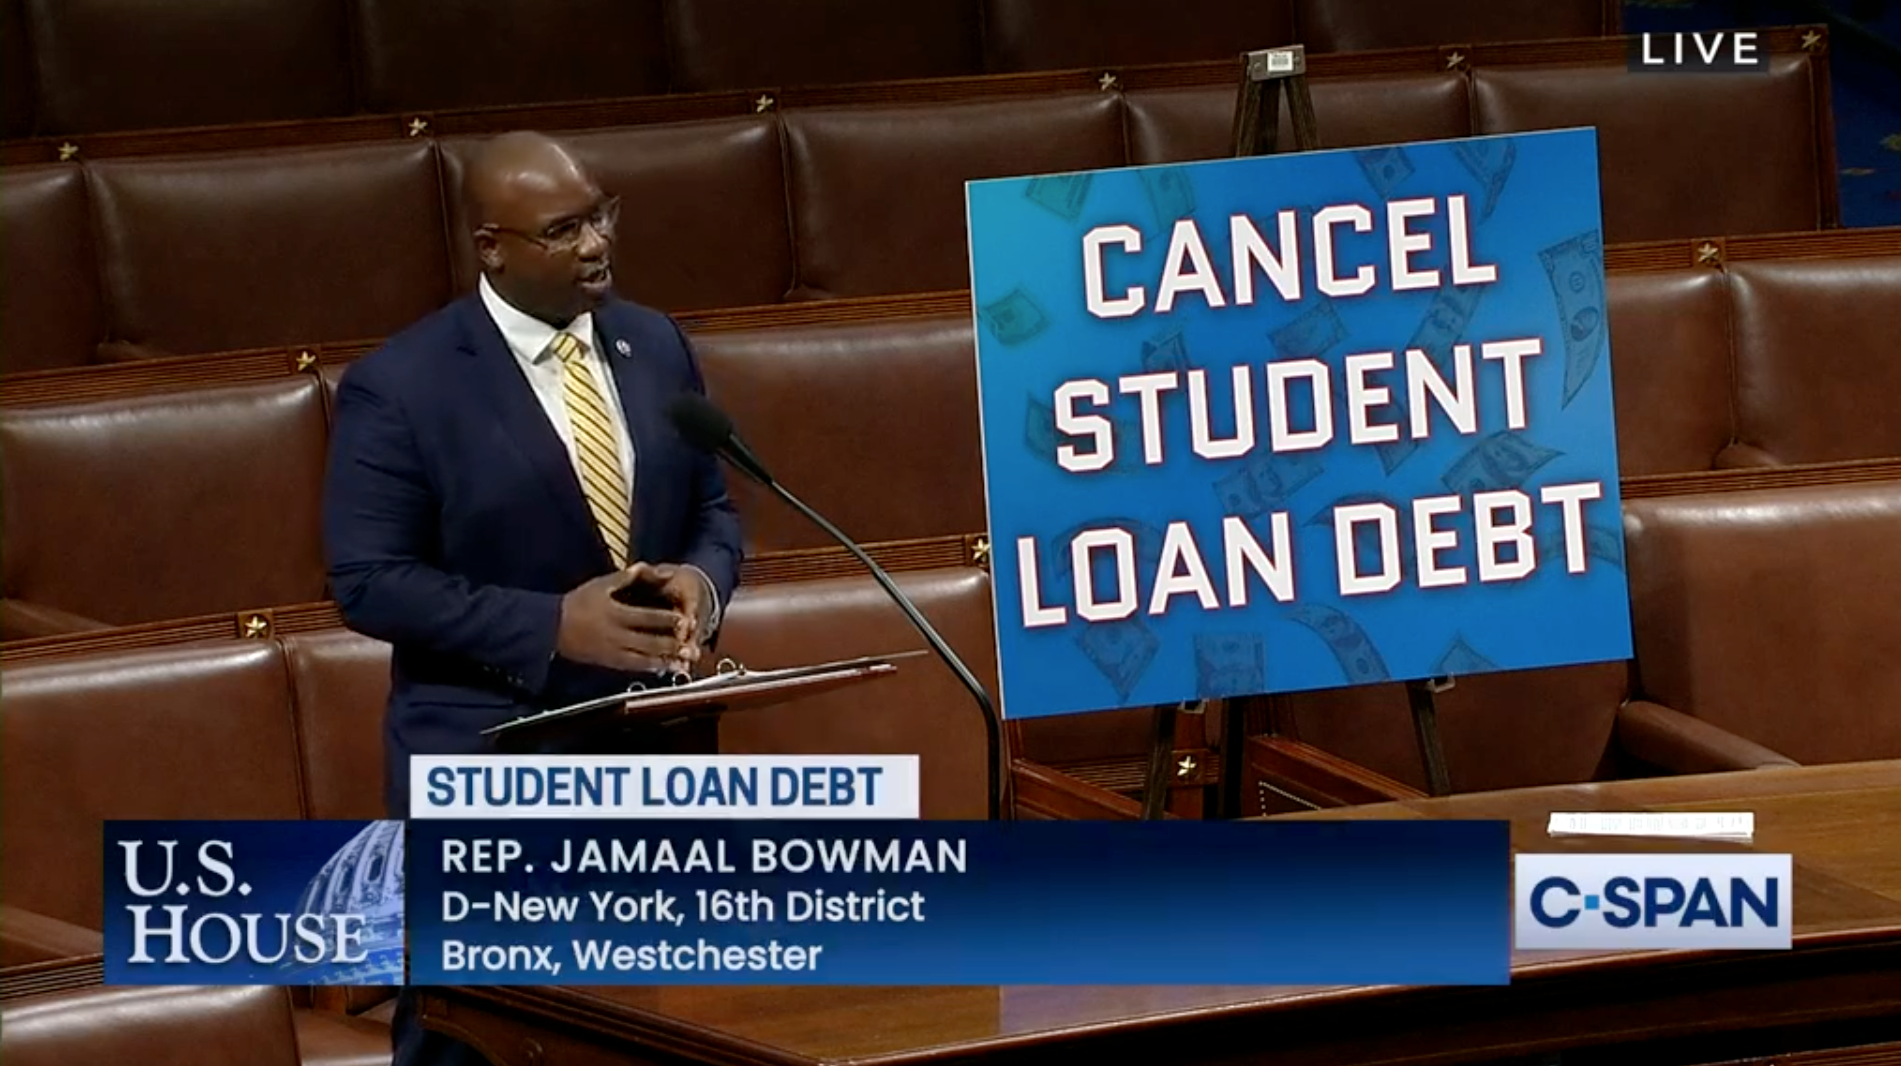 Rep. Jamaal Bown (D-N.Y.) speaks on the House floor Thursday and calls for the cancellation of student debt.